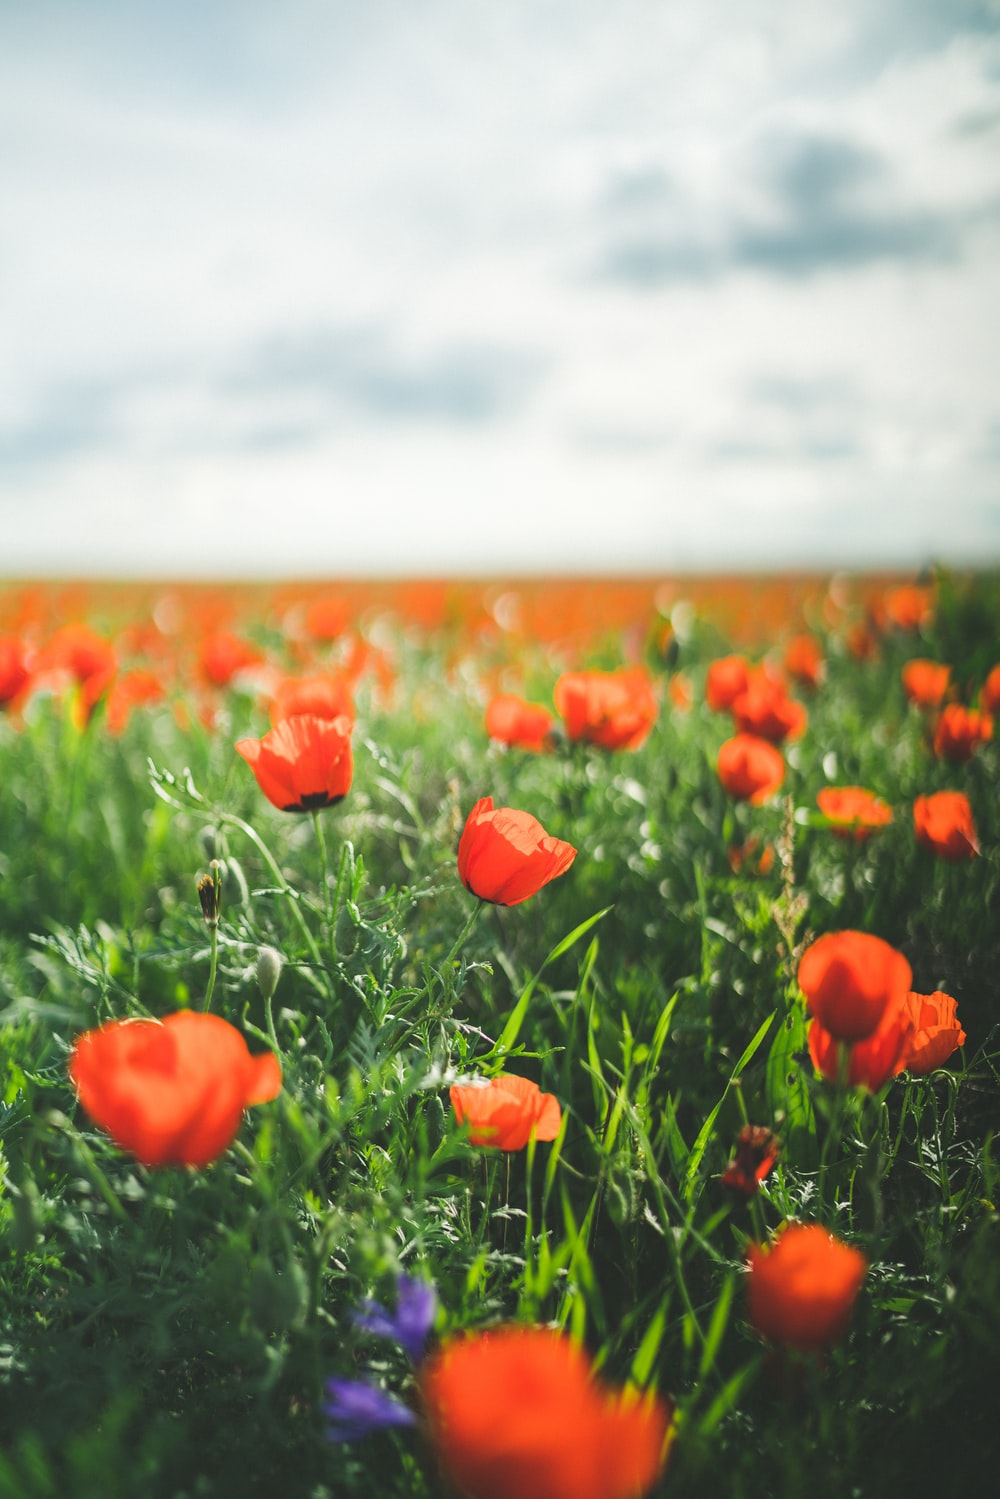 Field Of Roses Picture. Download Free Image